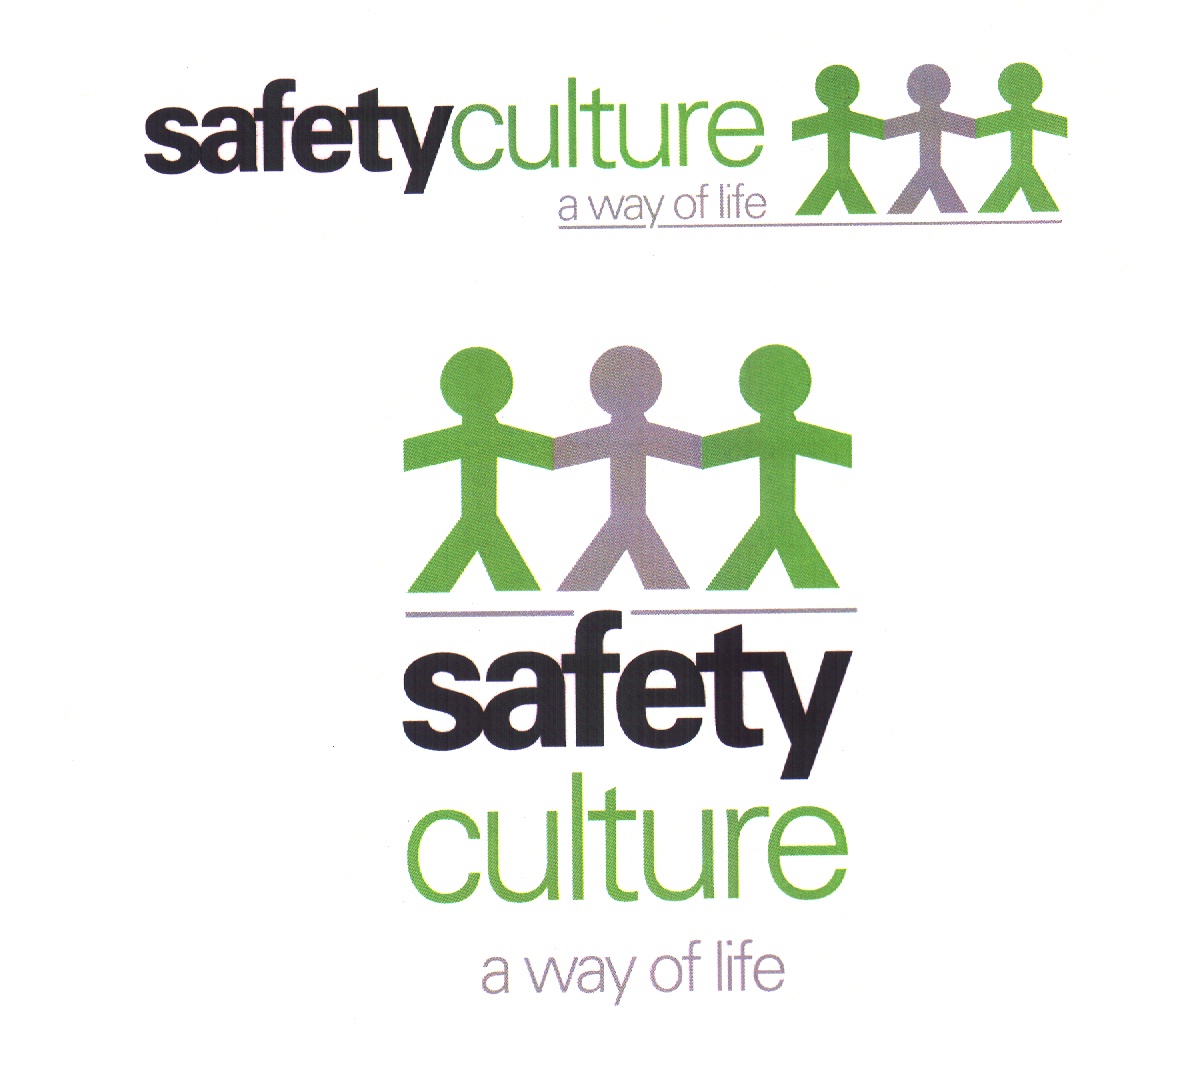 SAFETYCULTURE A WAY OF LIFE SAFETY CULTURE By Wades.